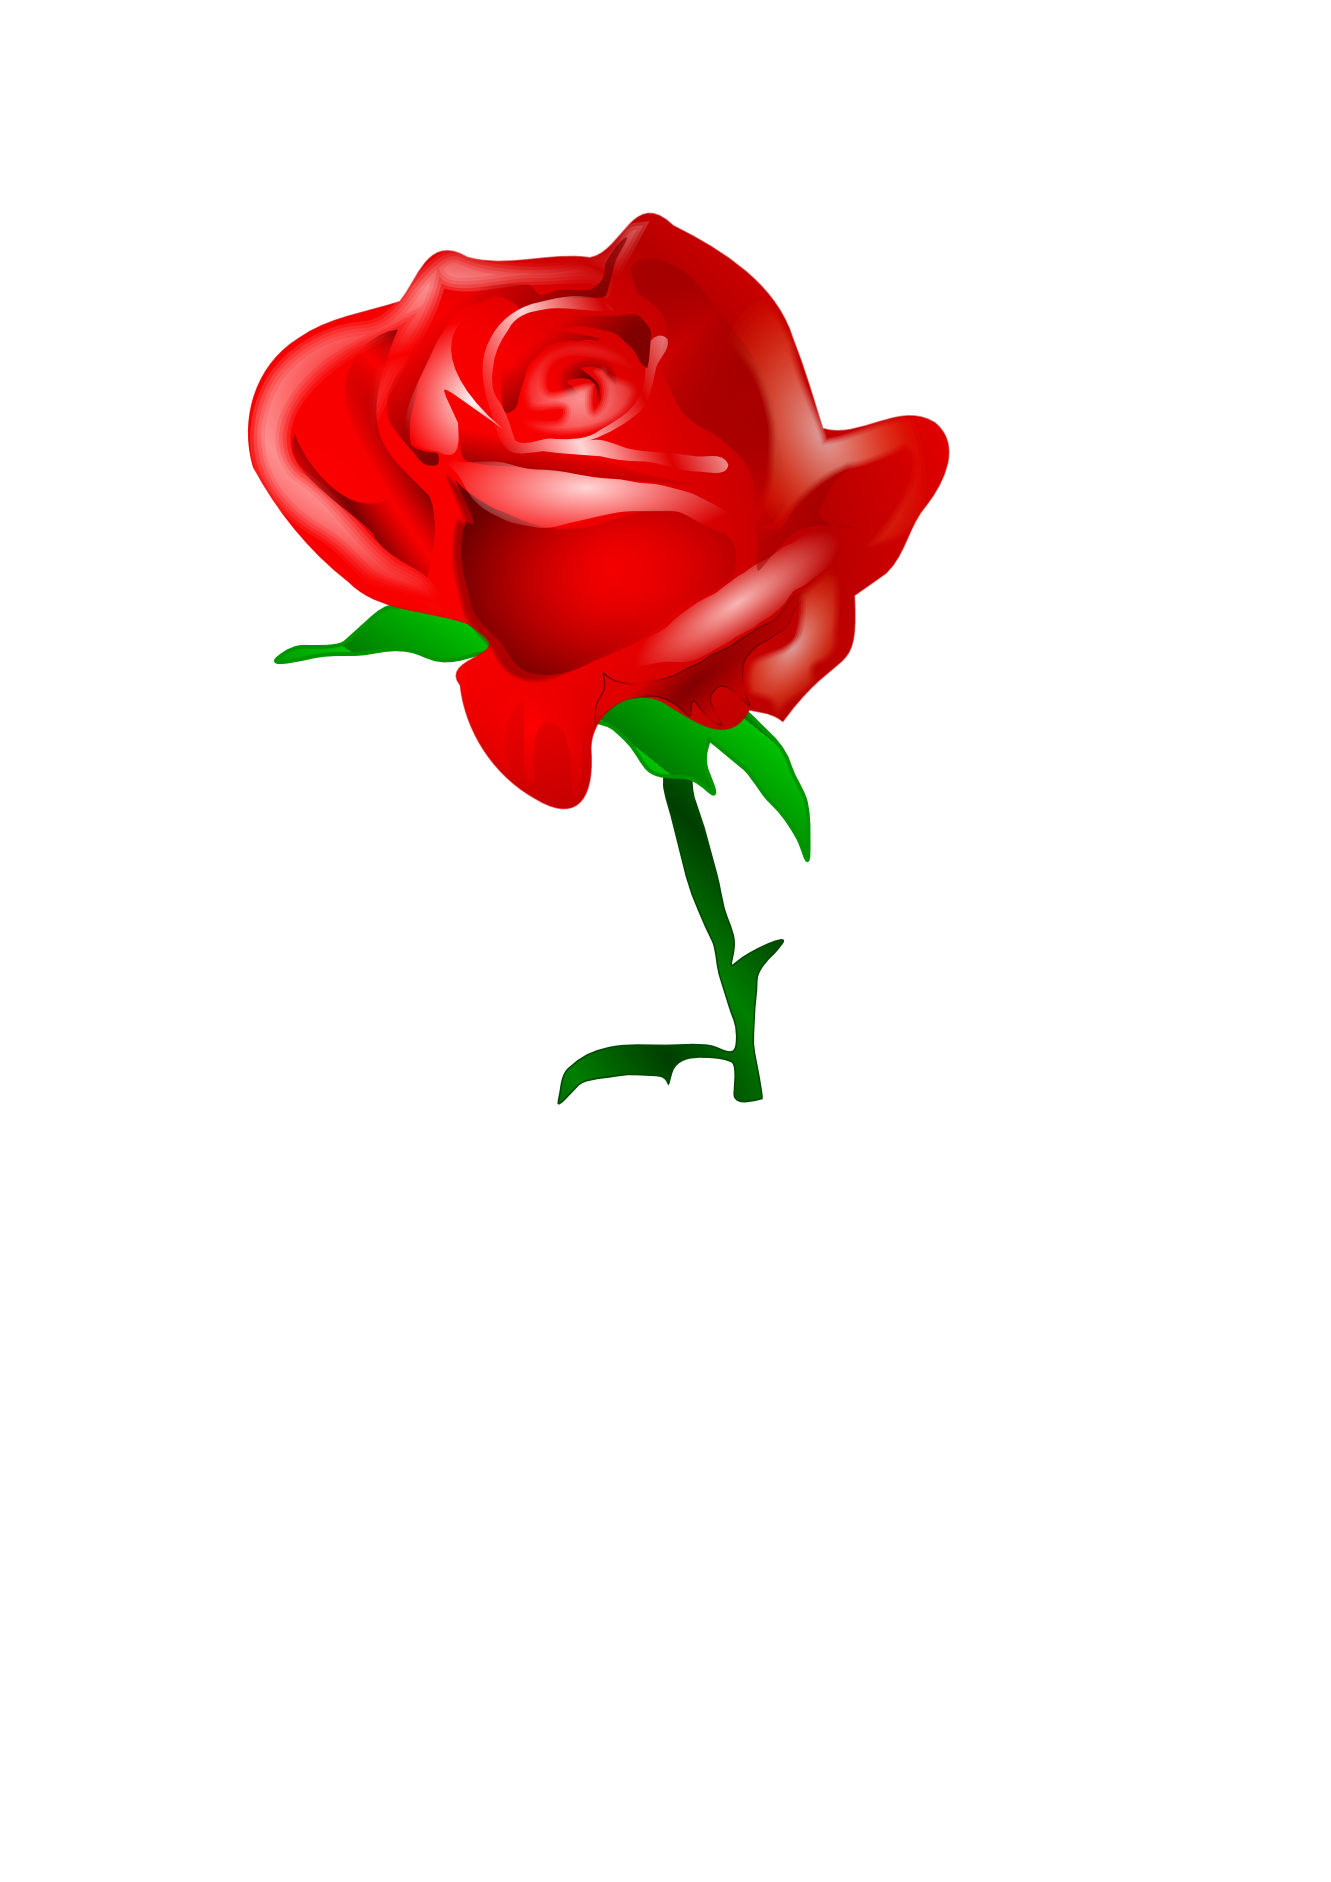 clipart rose images - photo #45